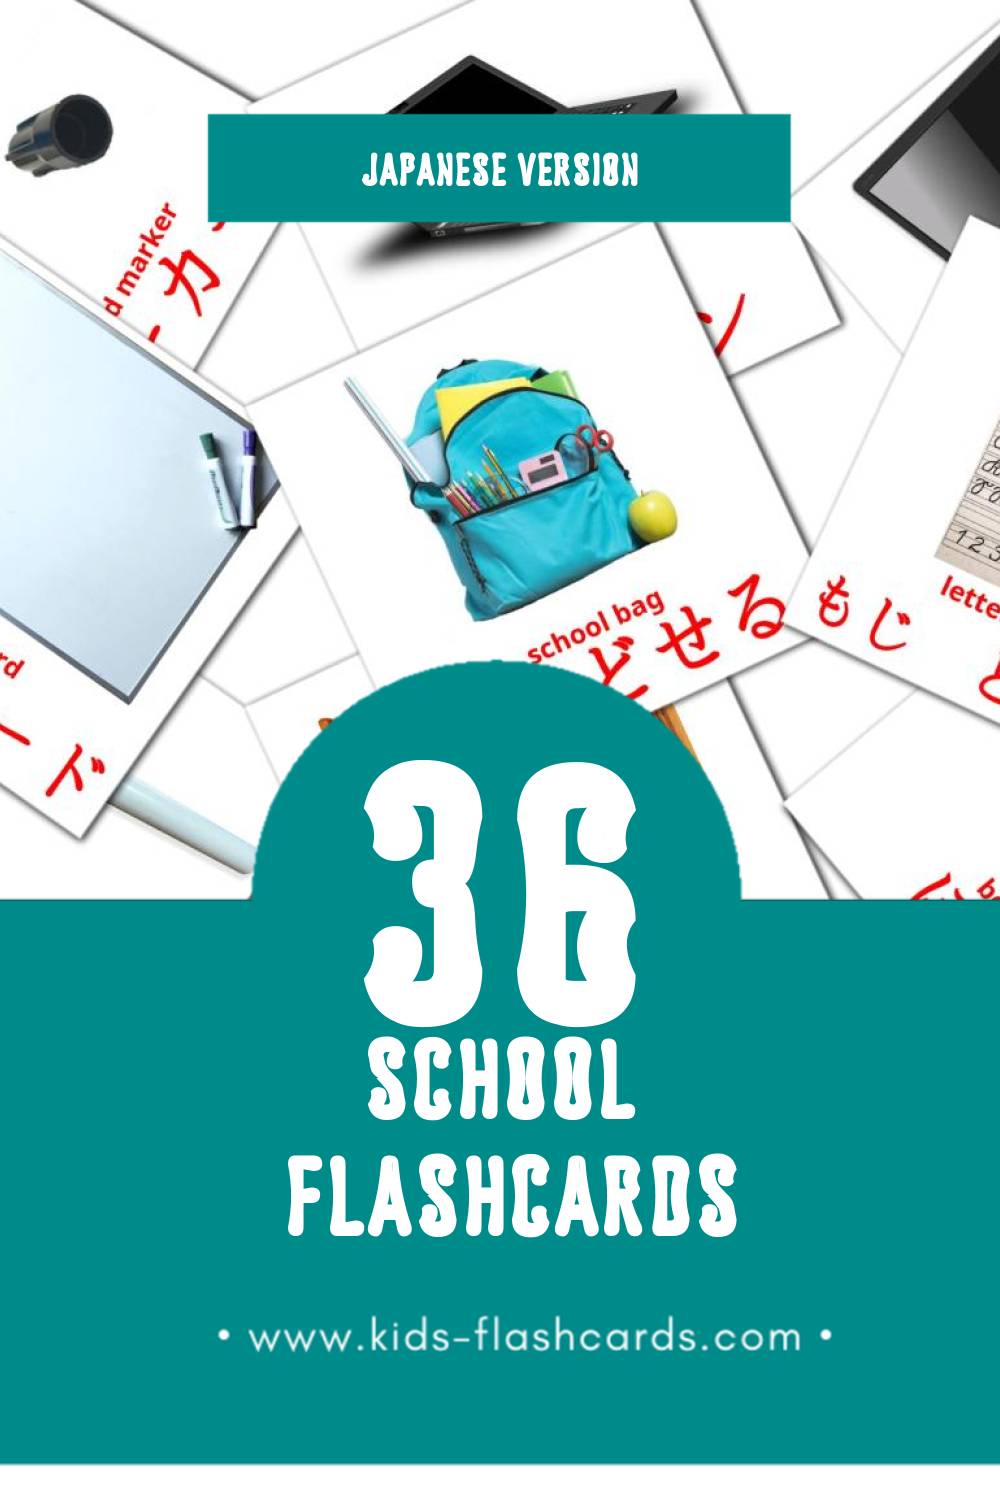 Visual がっこう Flashcards for Toddlers (36 cards in Japanese)